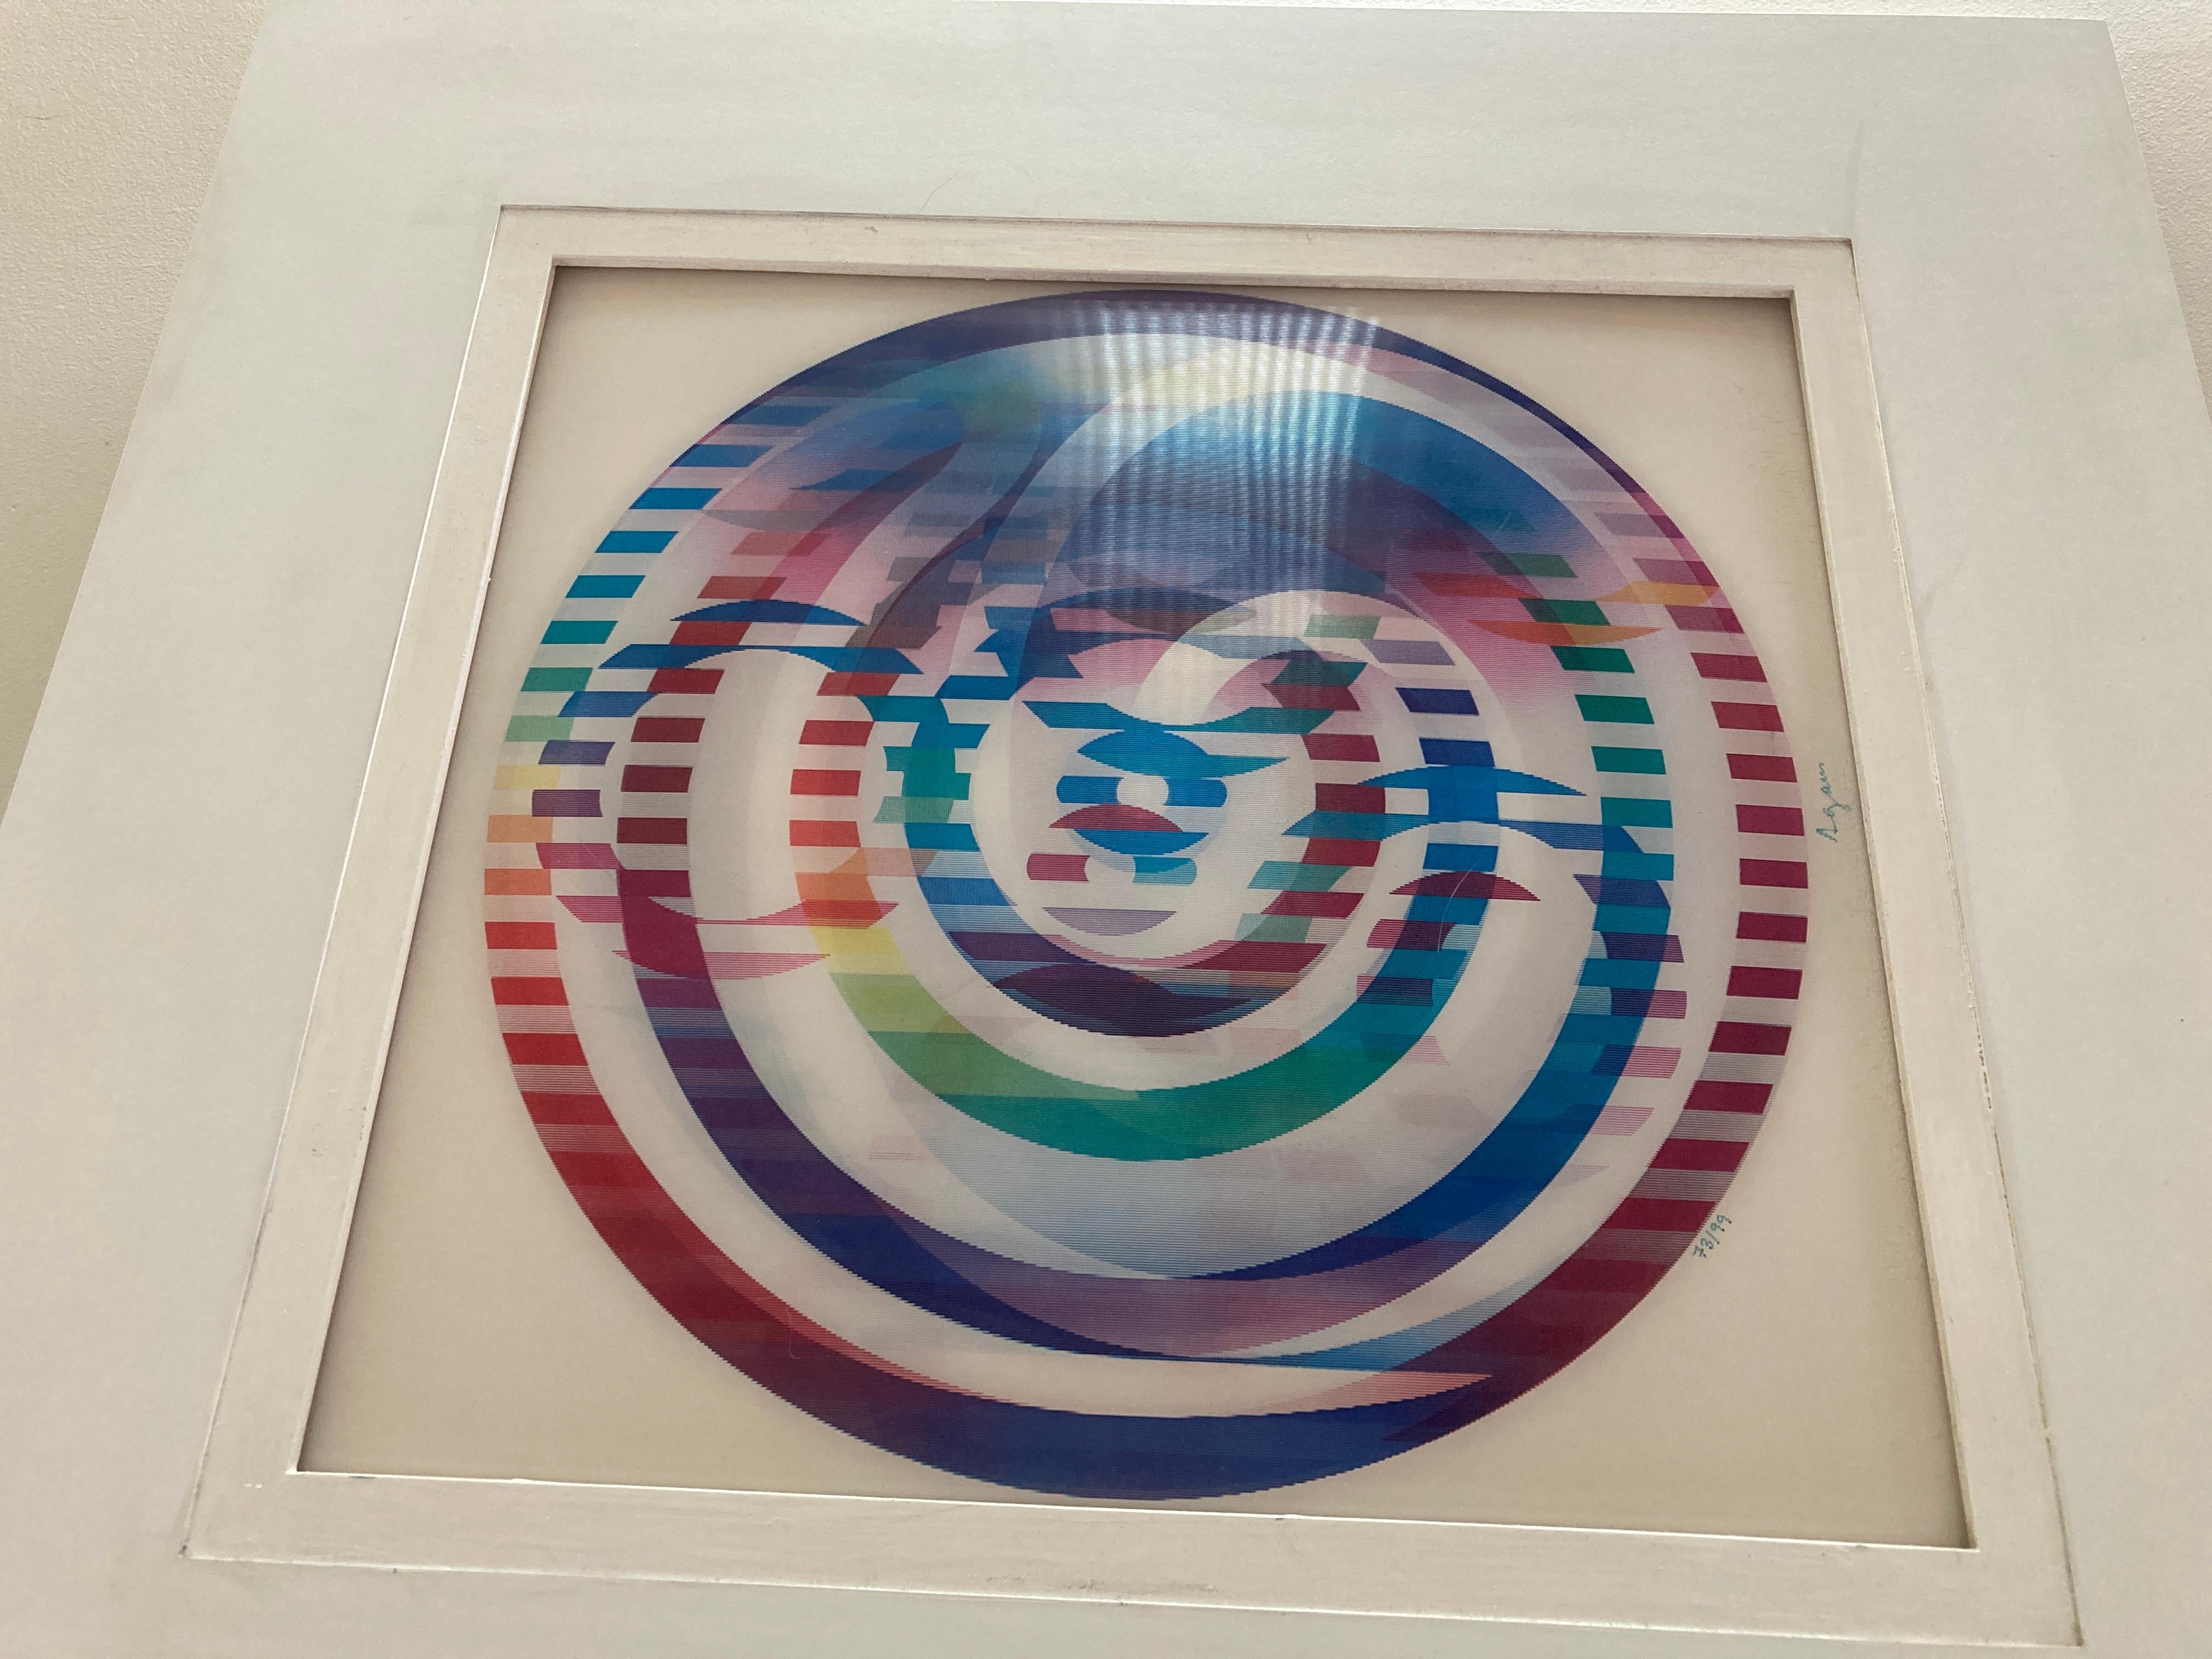 Yaacov Agam 'Image of the World' Signed, Limited Edition Lenticular Agamograph 7